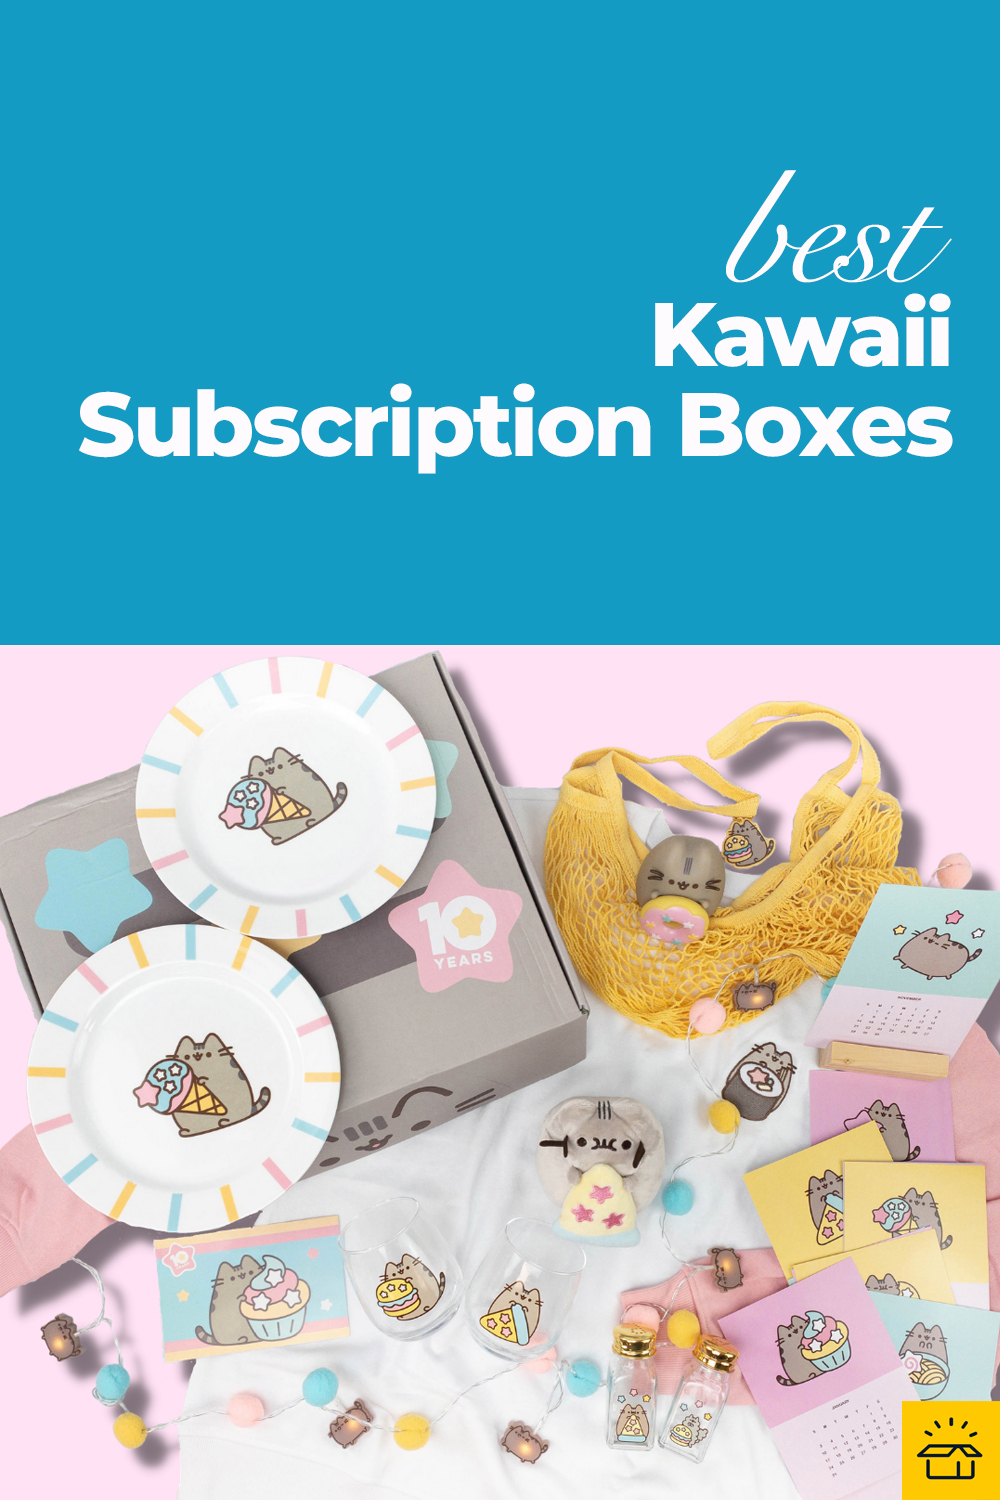 What Makes a Story: Studio Ghibli Edition - YumeTwins: The Monthly Kawaii  Subscription Box Straight from Tokyo to Your Door!